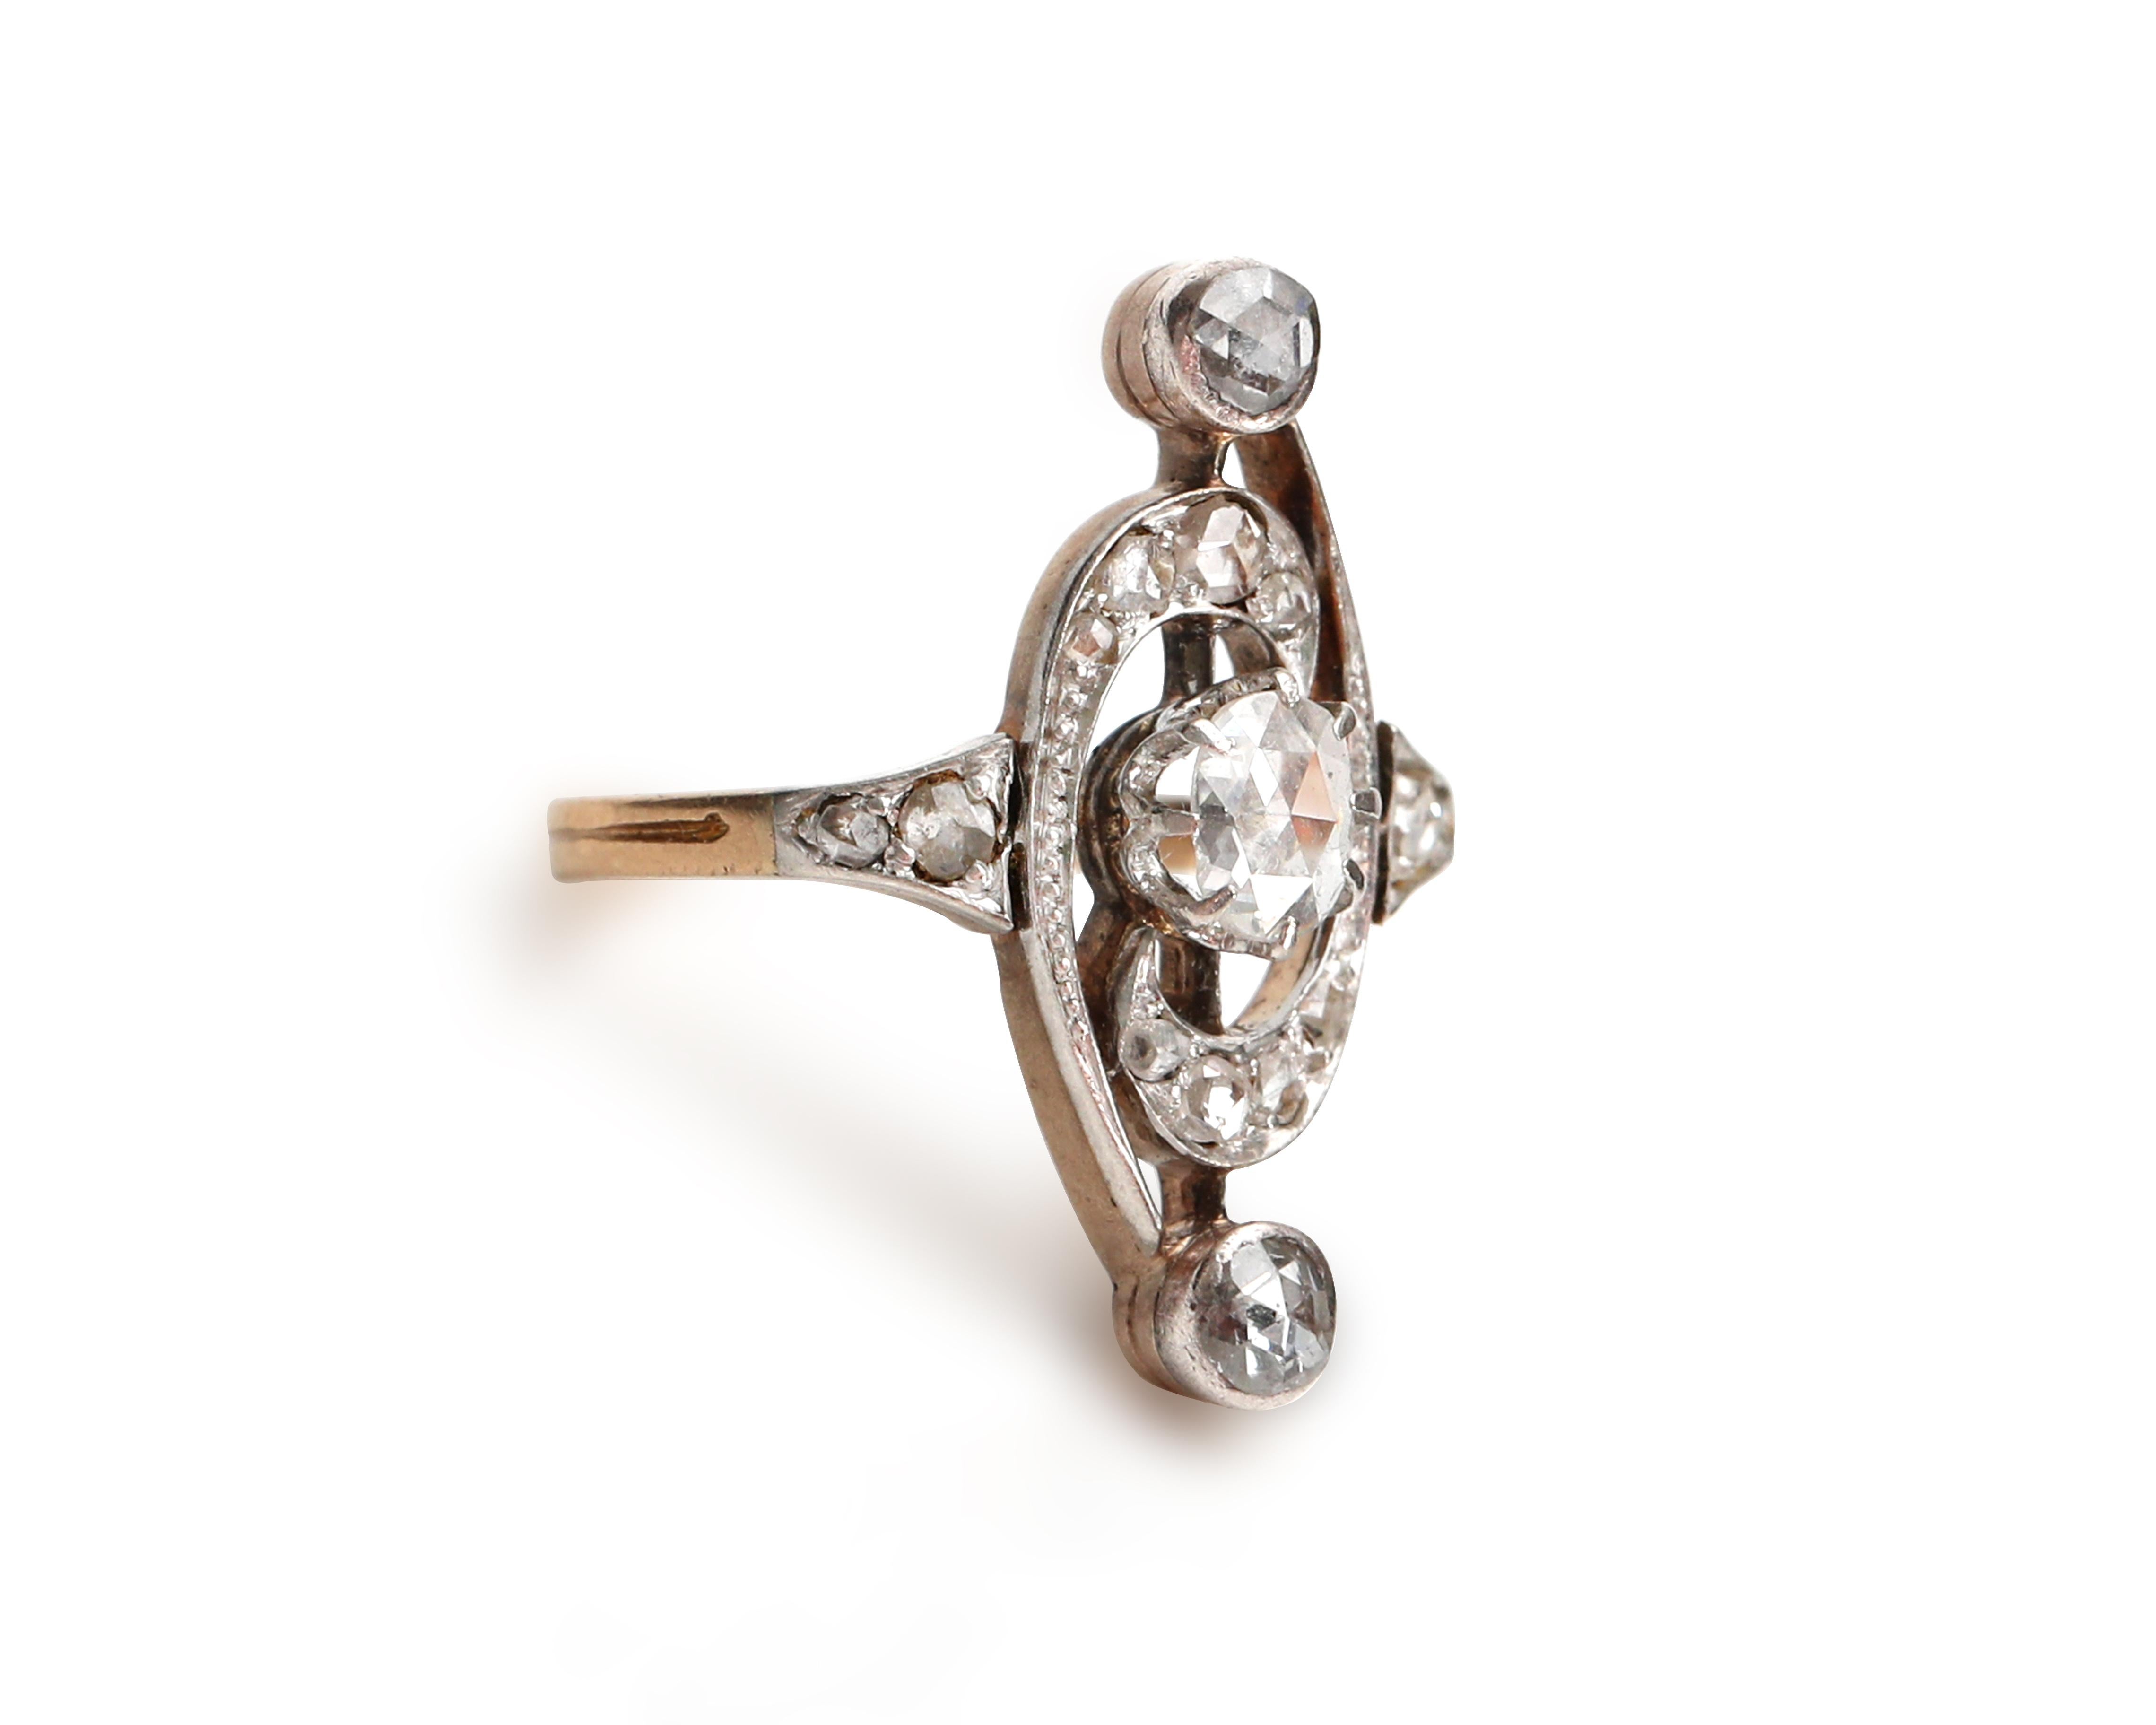 This is an exquisite example of a victorian fashion ring crafted in 9 karat gold with a platinum top, it is adorned with 15 period correct old rose cut diamonds. At over 120 years old, this lovely ring is still in incredible condition! This would